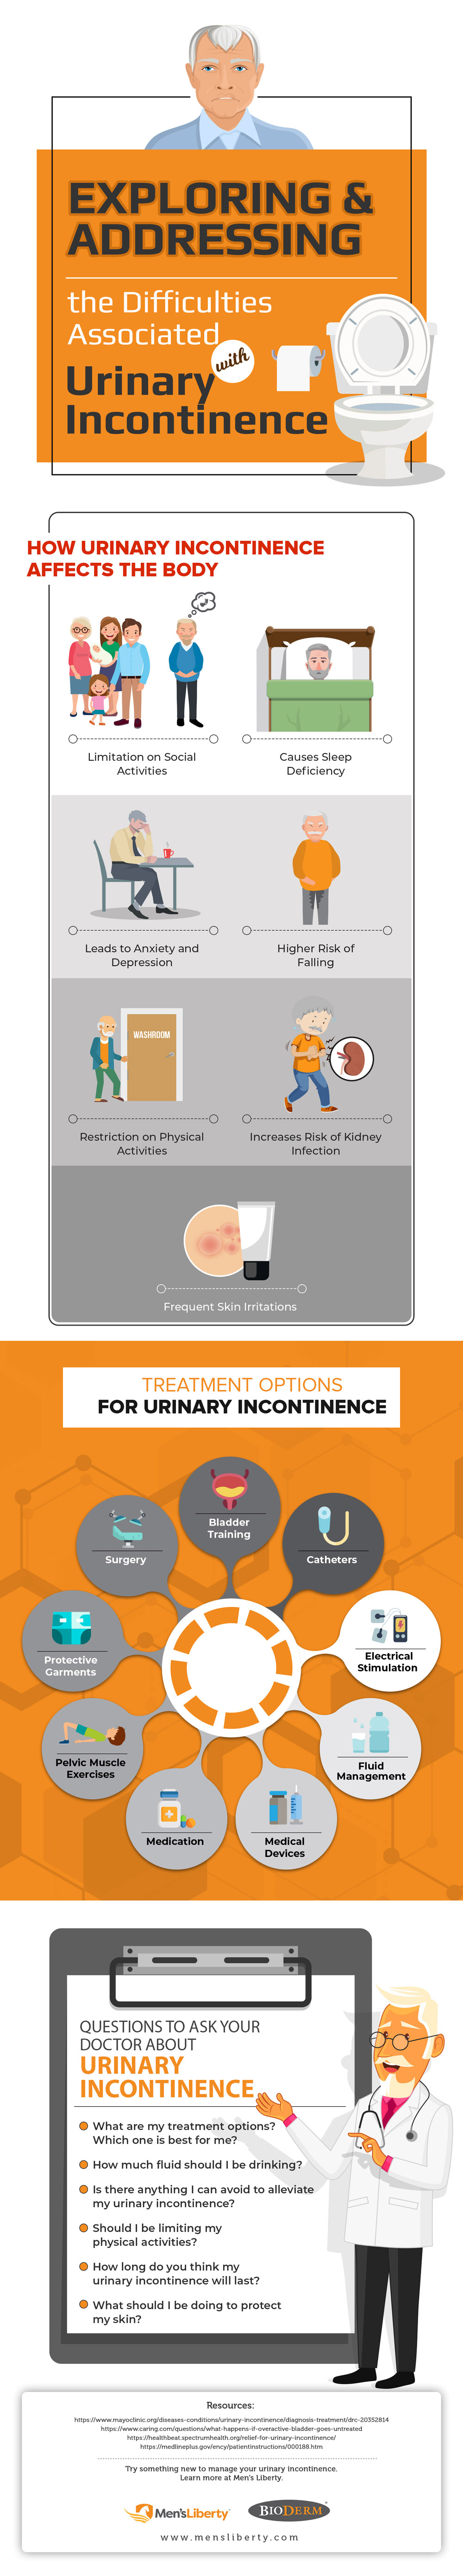 Difficulties Associated with Urinary Incontinence